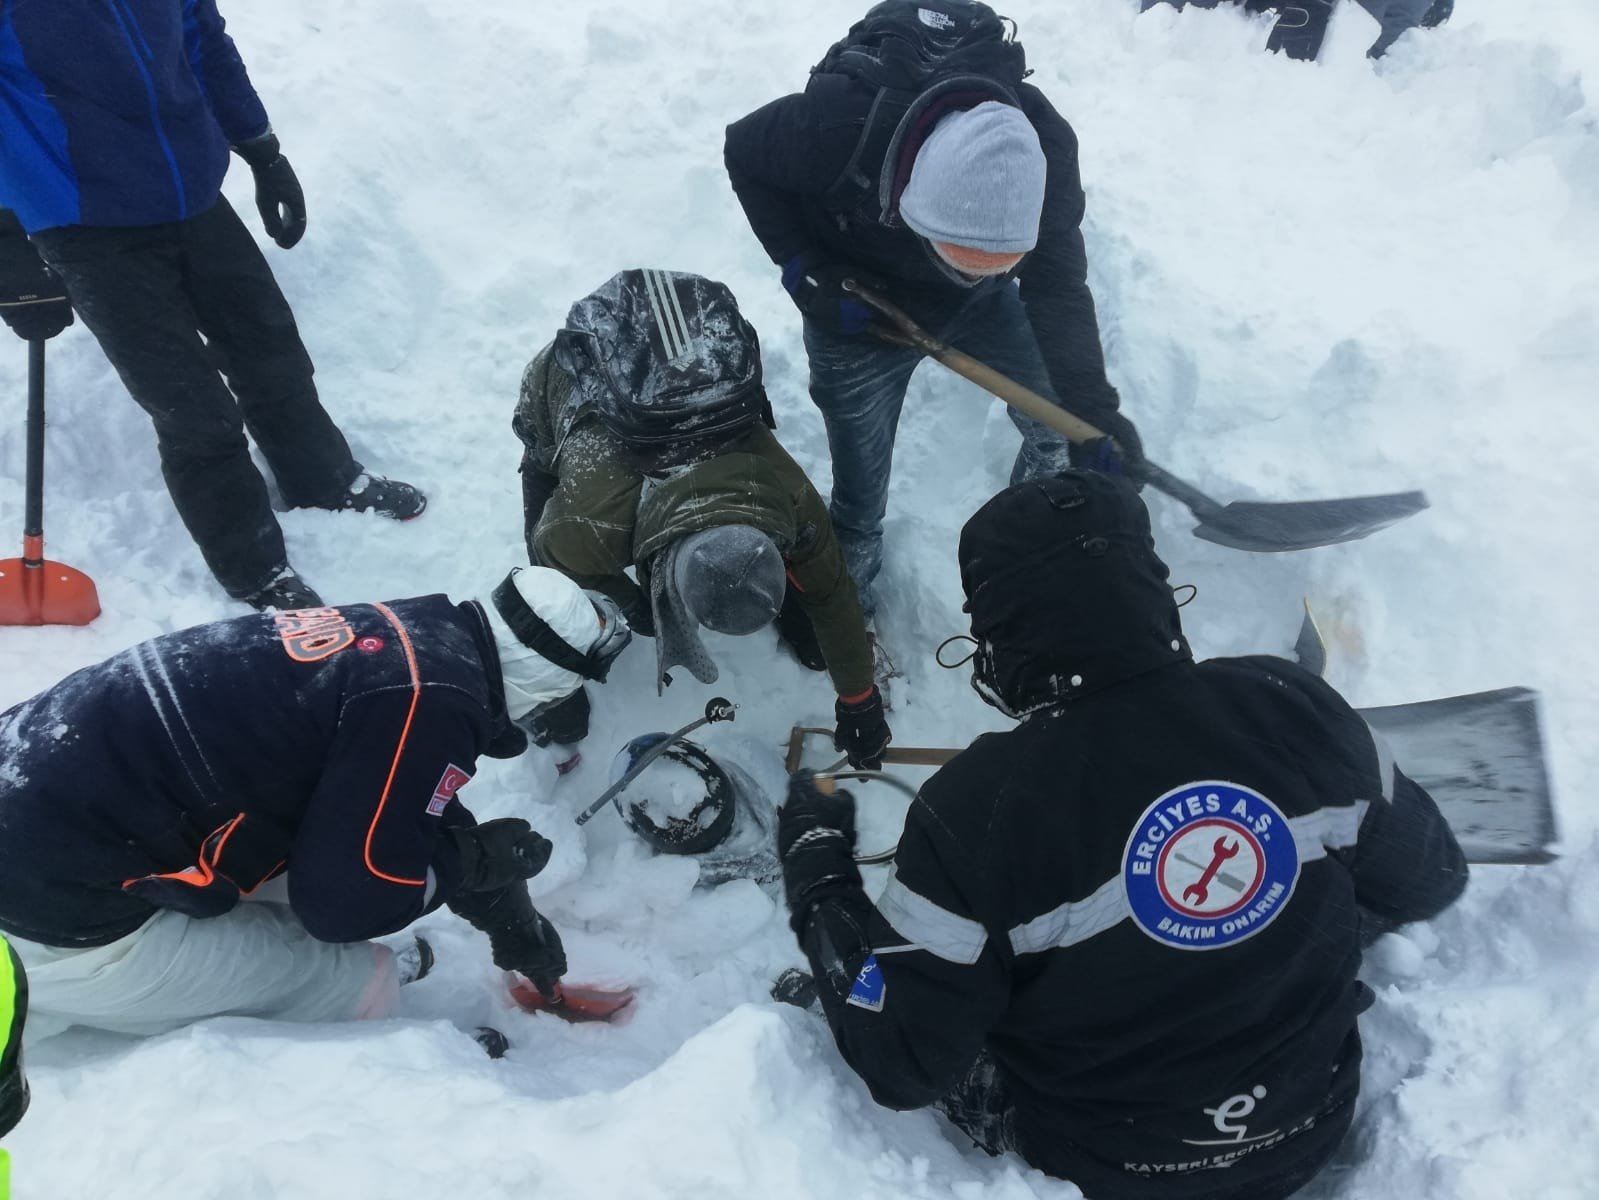 Search and rescue efforts of the teams after the avalanche in Erciyes Ski Center, Kayseri, Turkey, Jan. 16, 2022. (IHA Photo)